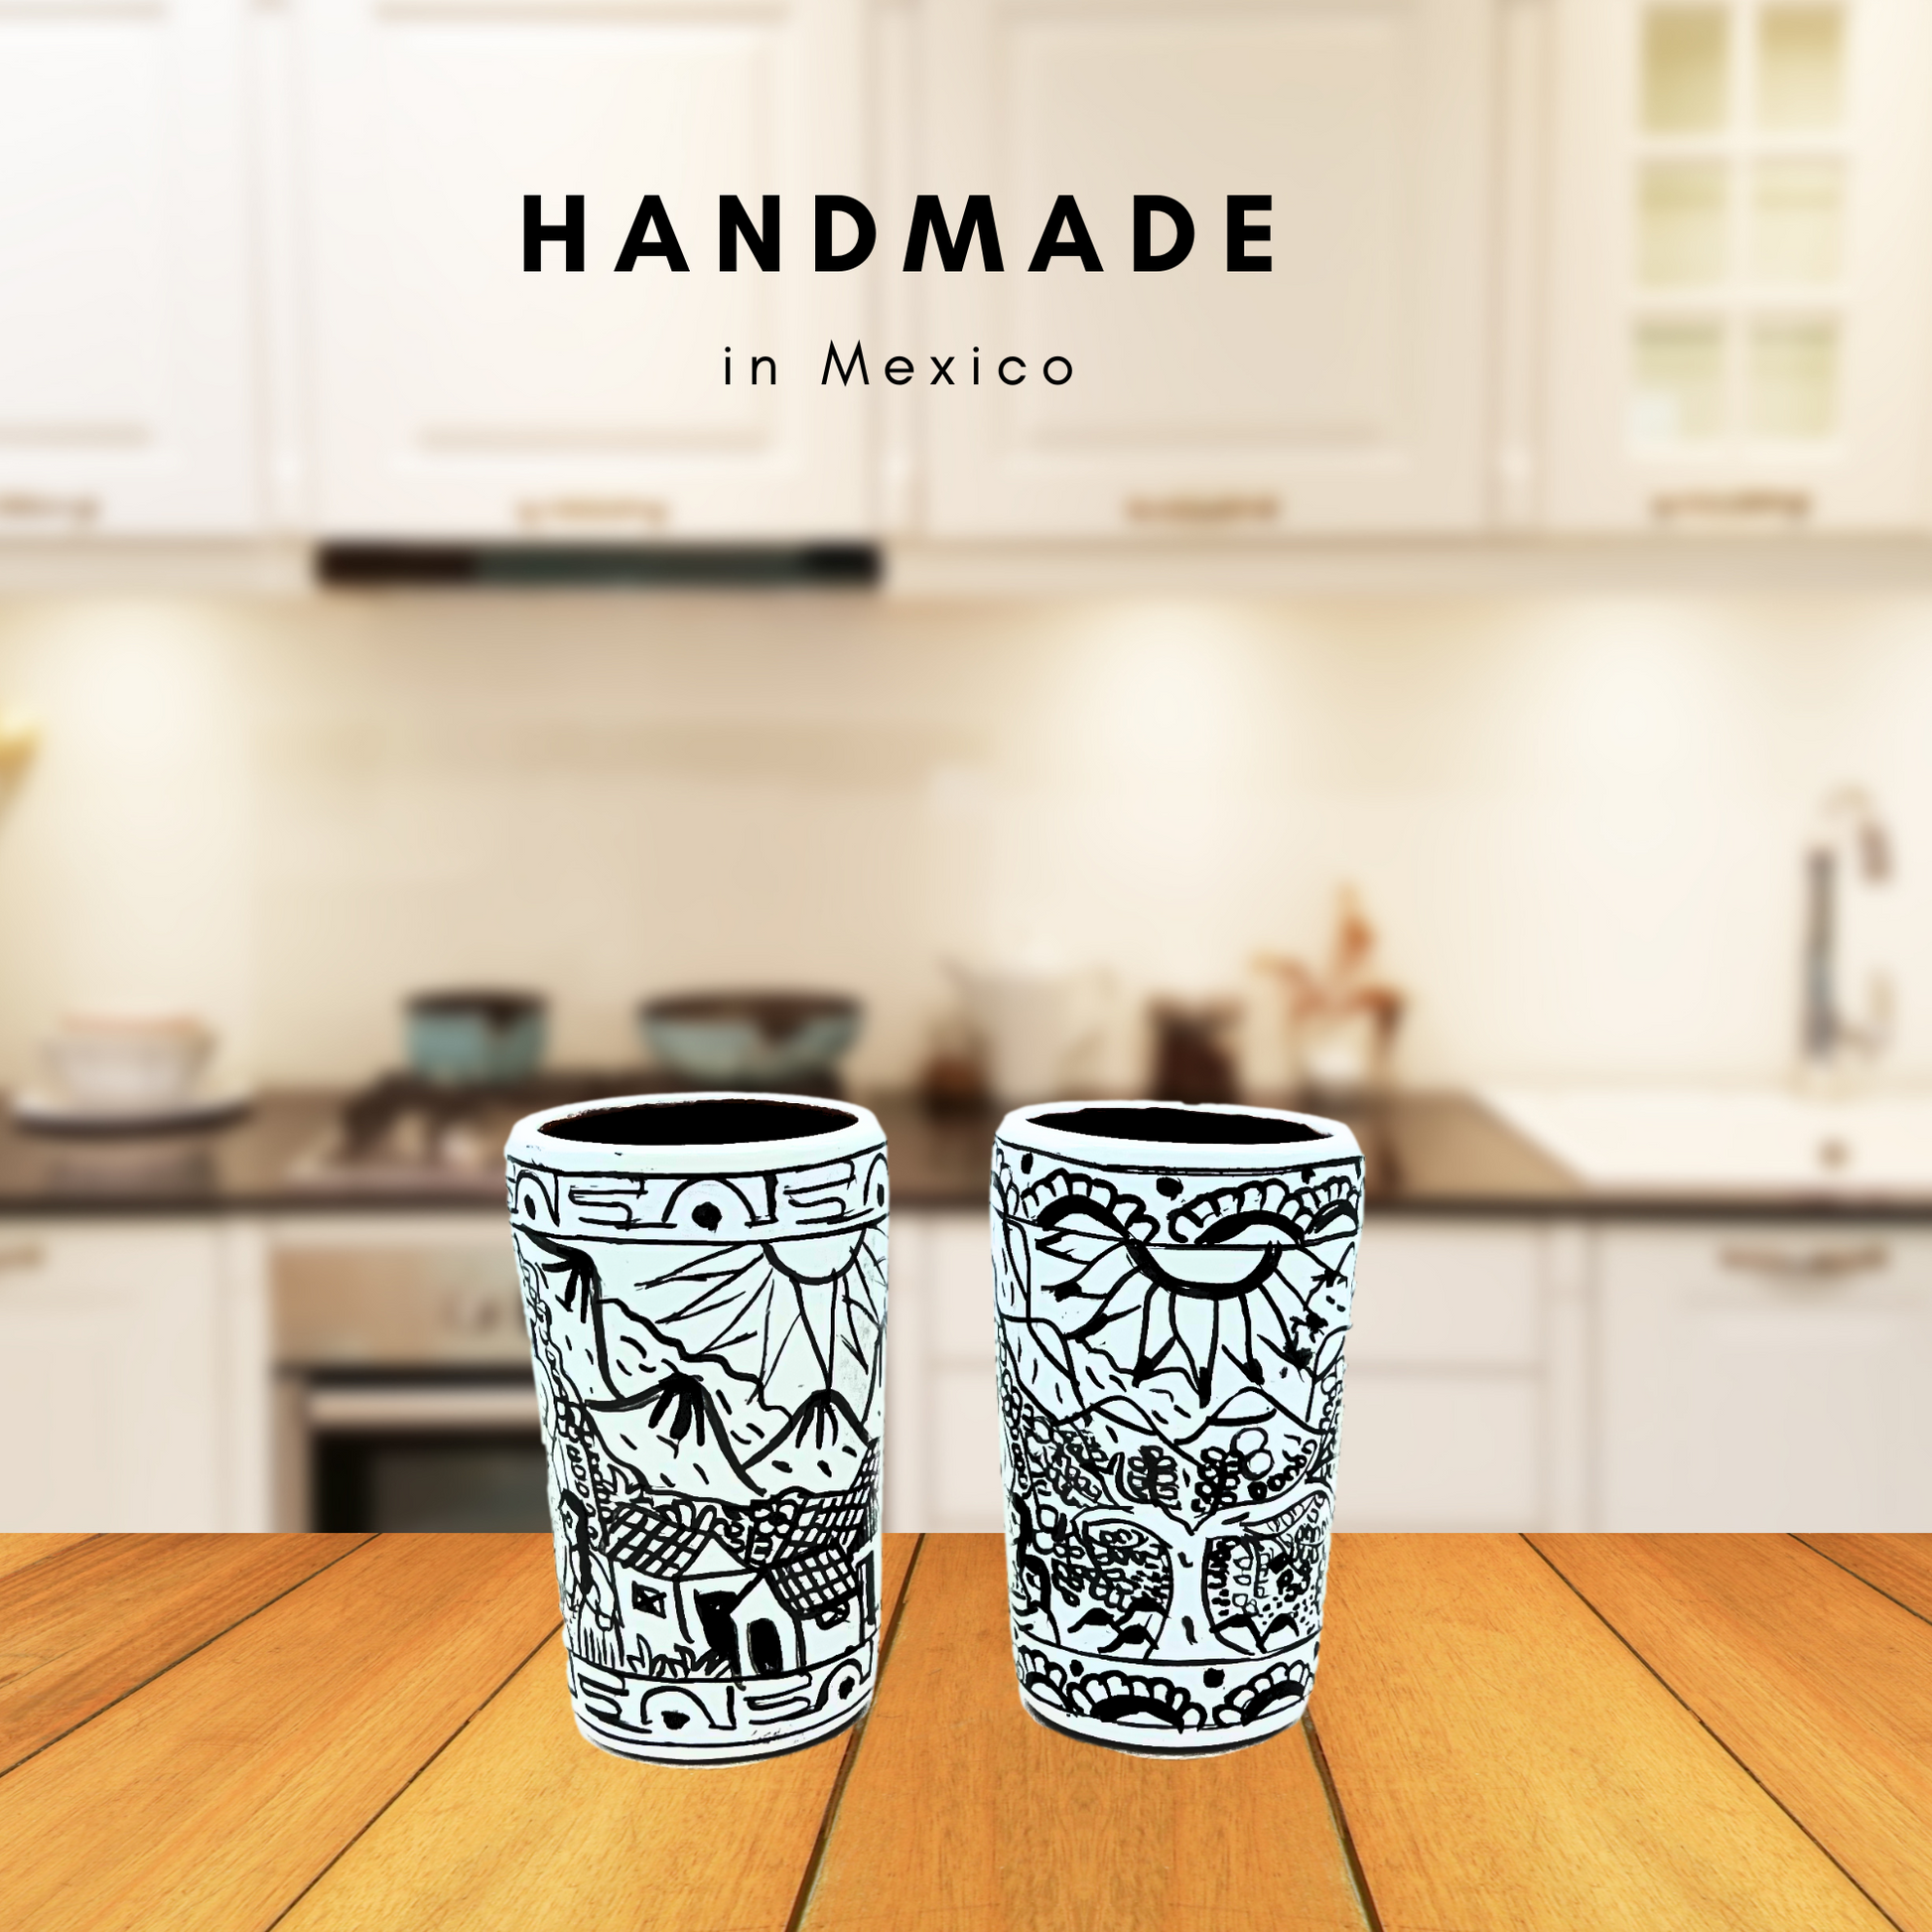 White ceramic shot glasses, individually hand-painted in Mexico, ideal for tequila, mezcal, or other spirits, pack of 2.